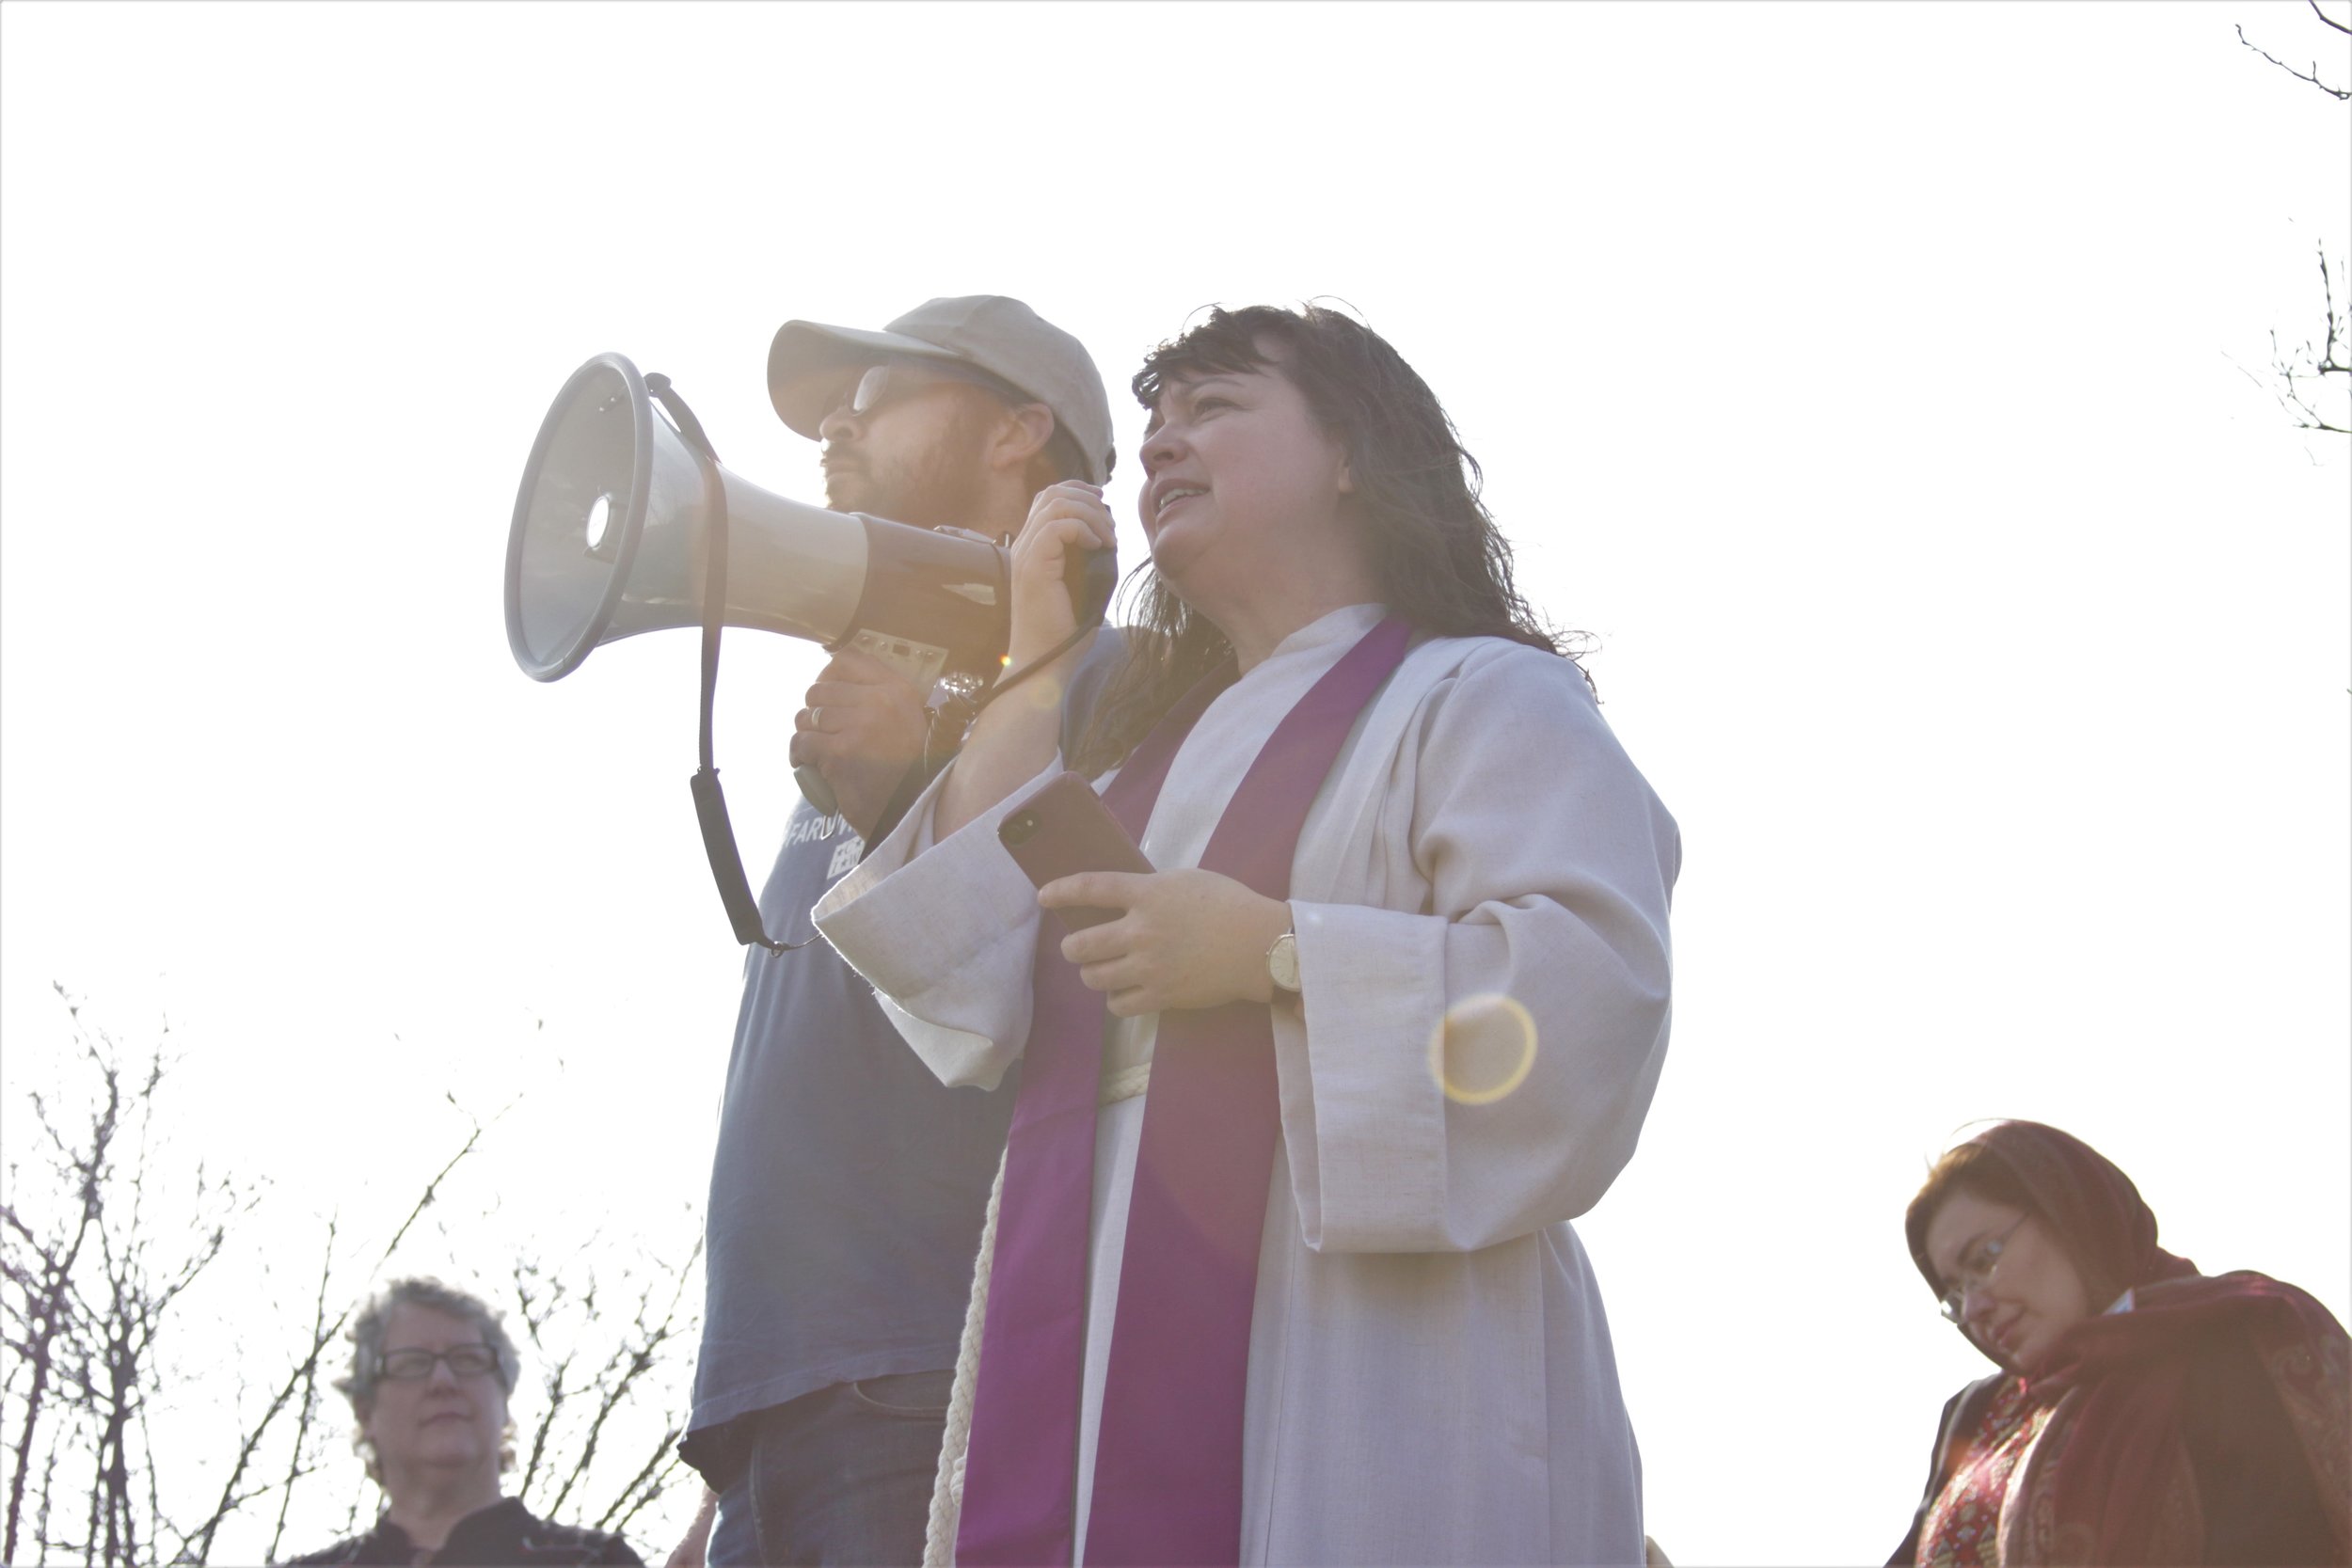  Rev. Laura Young, pastor of Summit UMC in Columbus, OH draws on scripture to elevate the struggle of farmworkers seeking justice and the people of faith and conscience that support them nationwide 